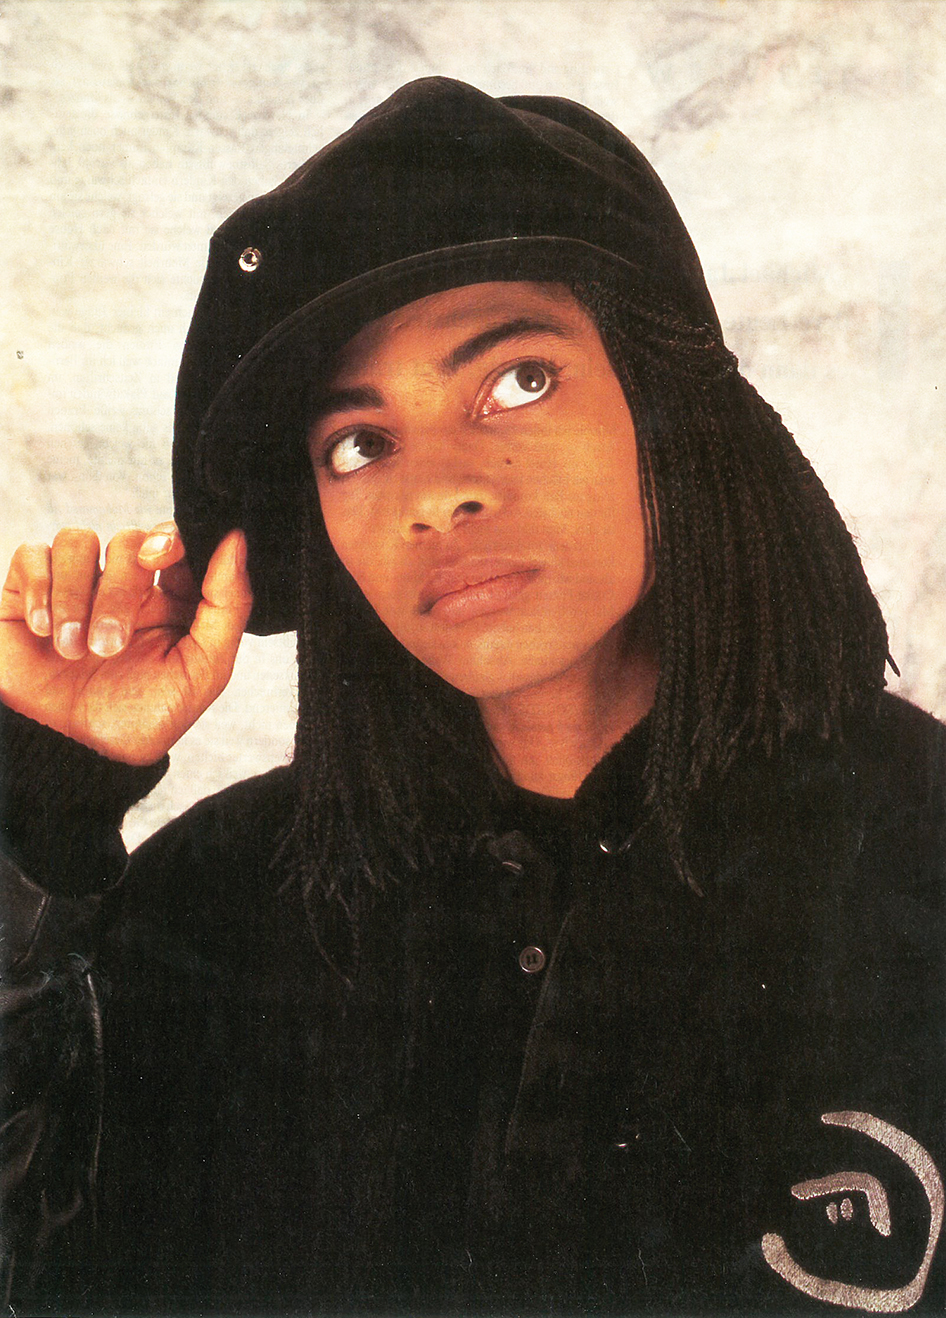 Terence Trent D’Arby, Sänger in der Frankfurter Funk-Band The Touch